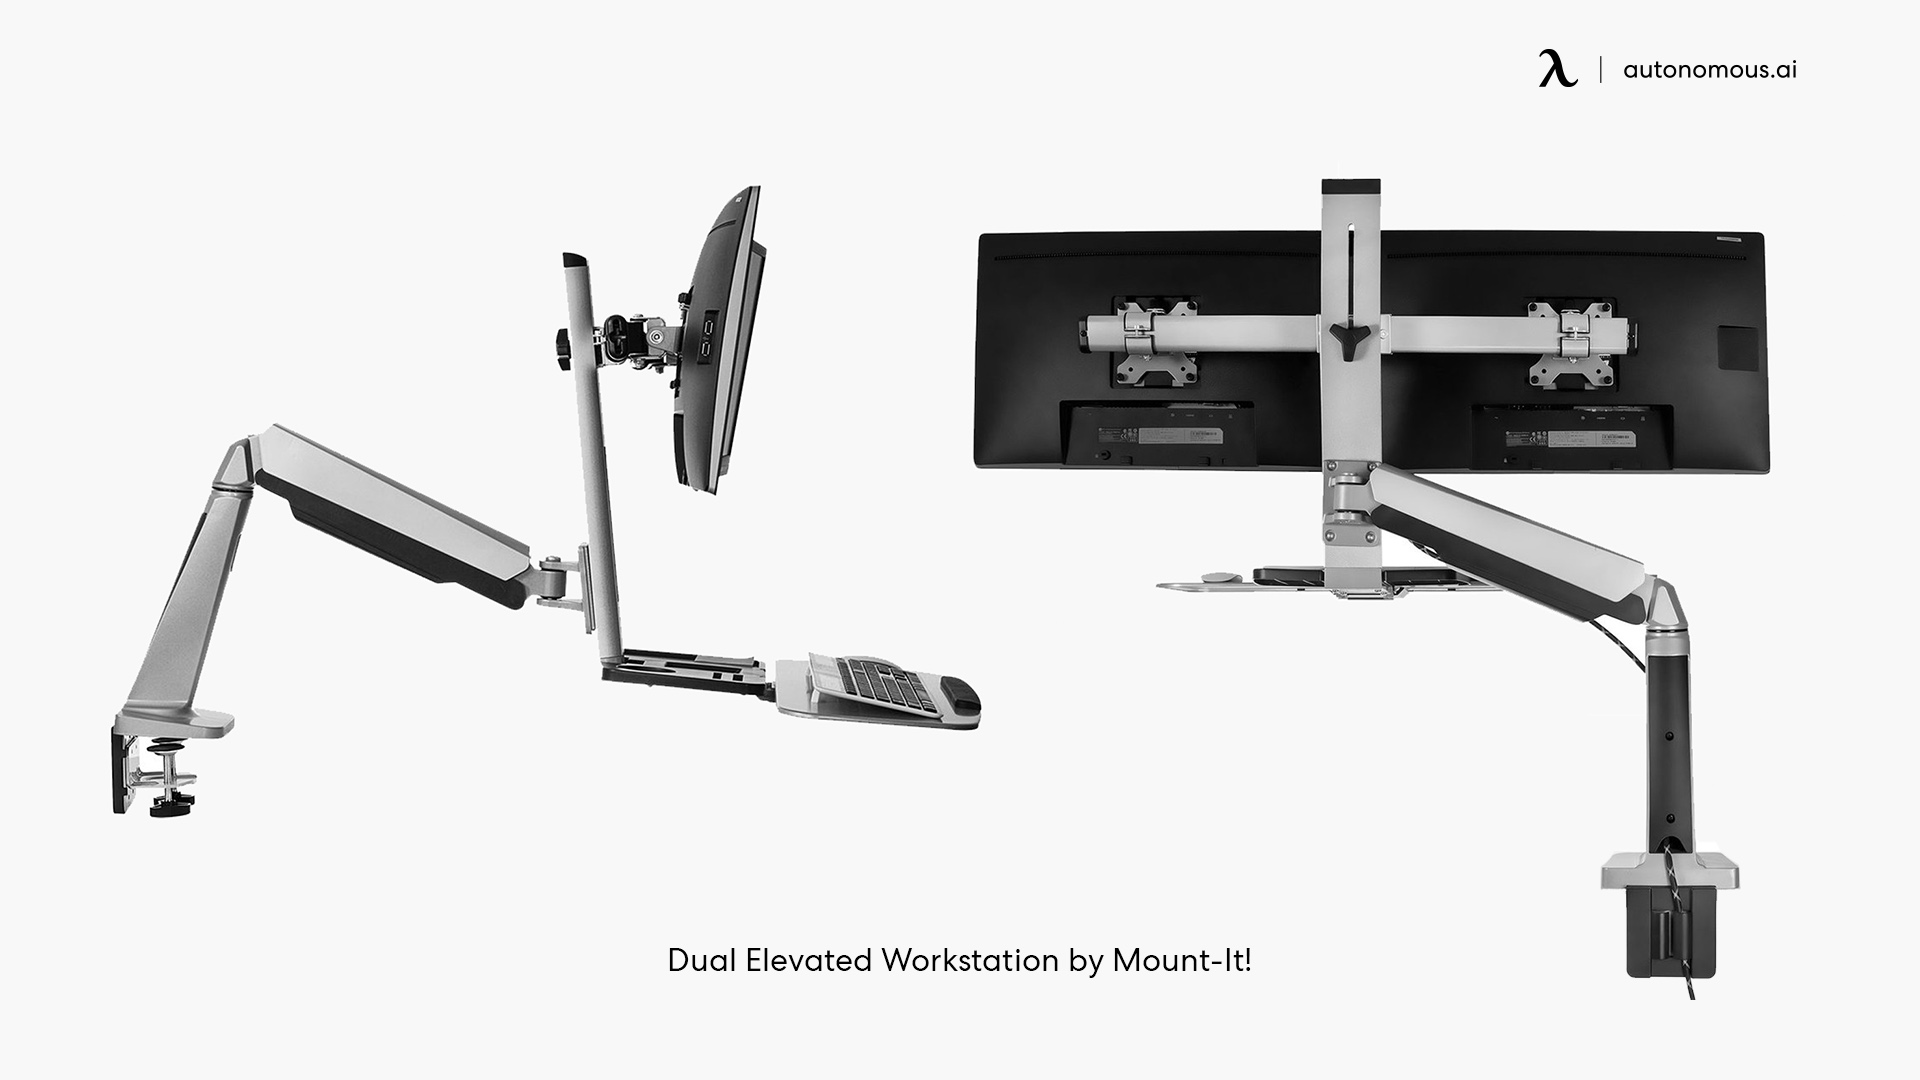 Dual Elevated Workstation by Mount-It!